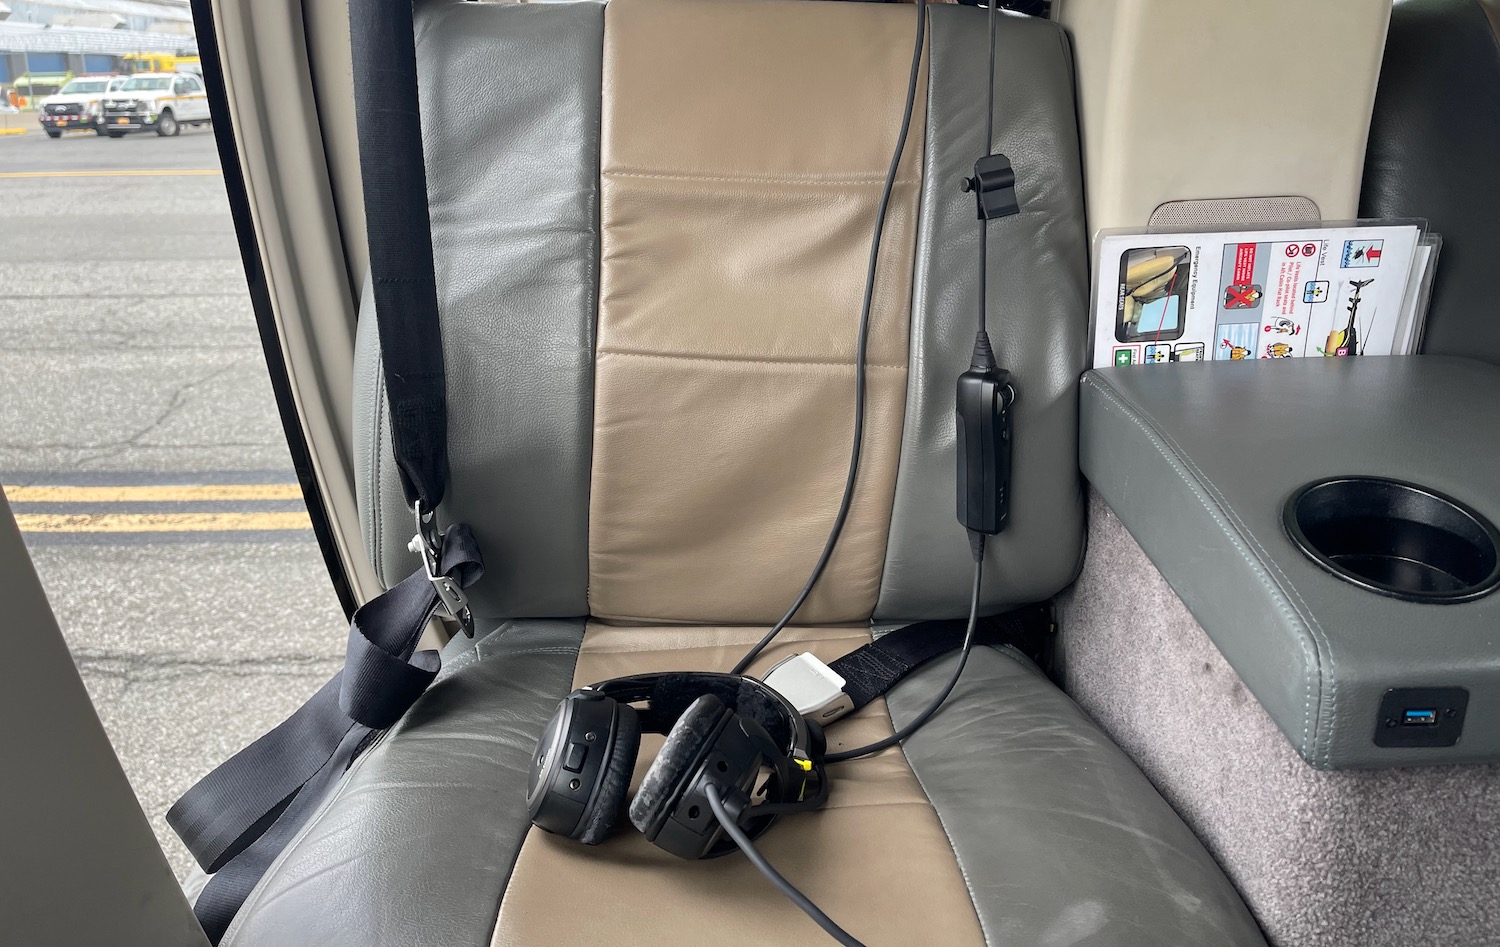 a headphones on a seat